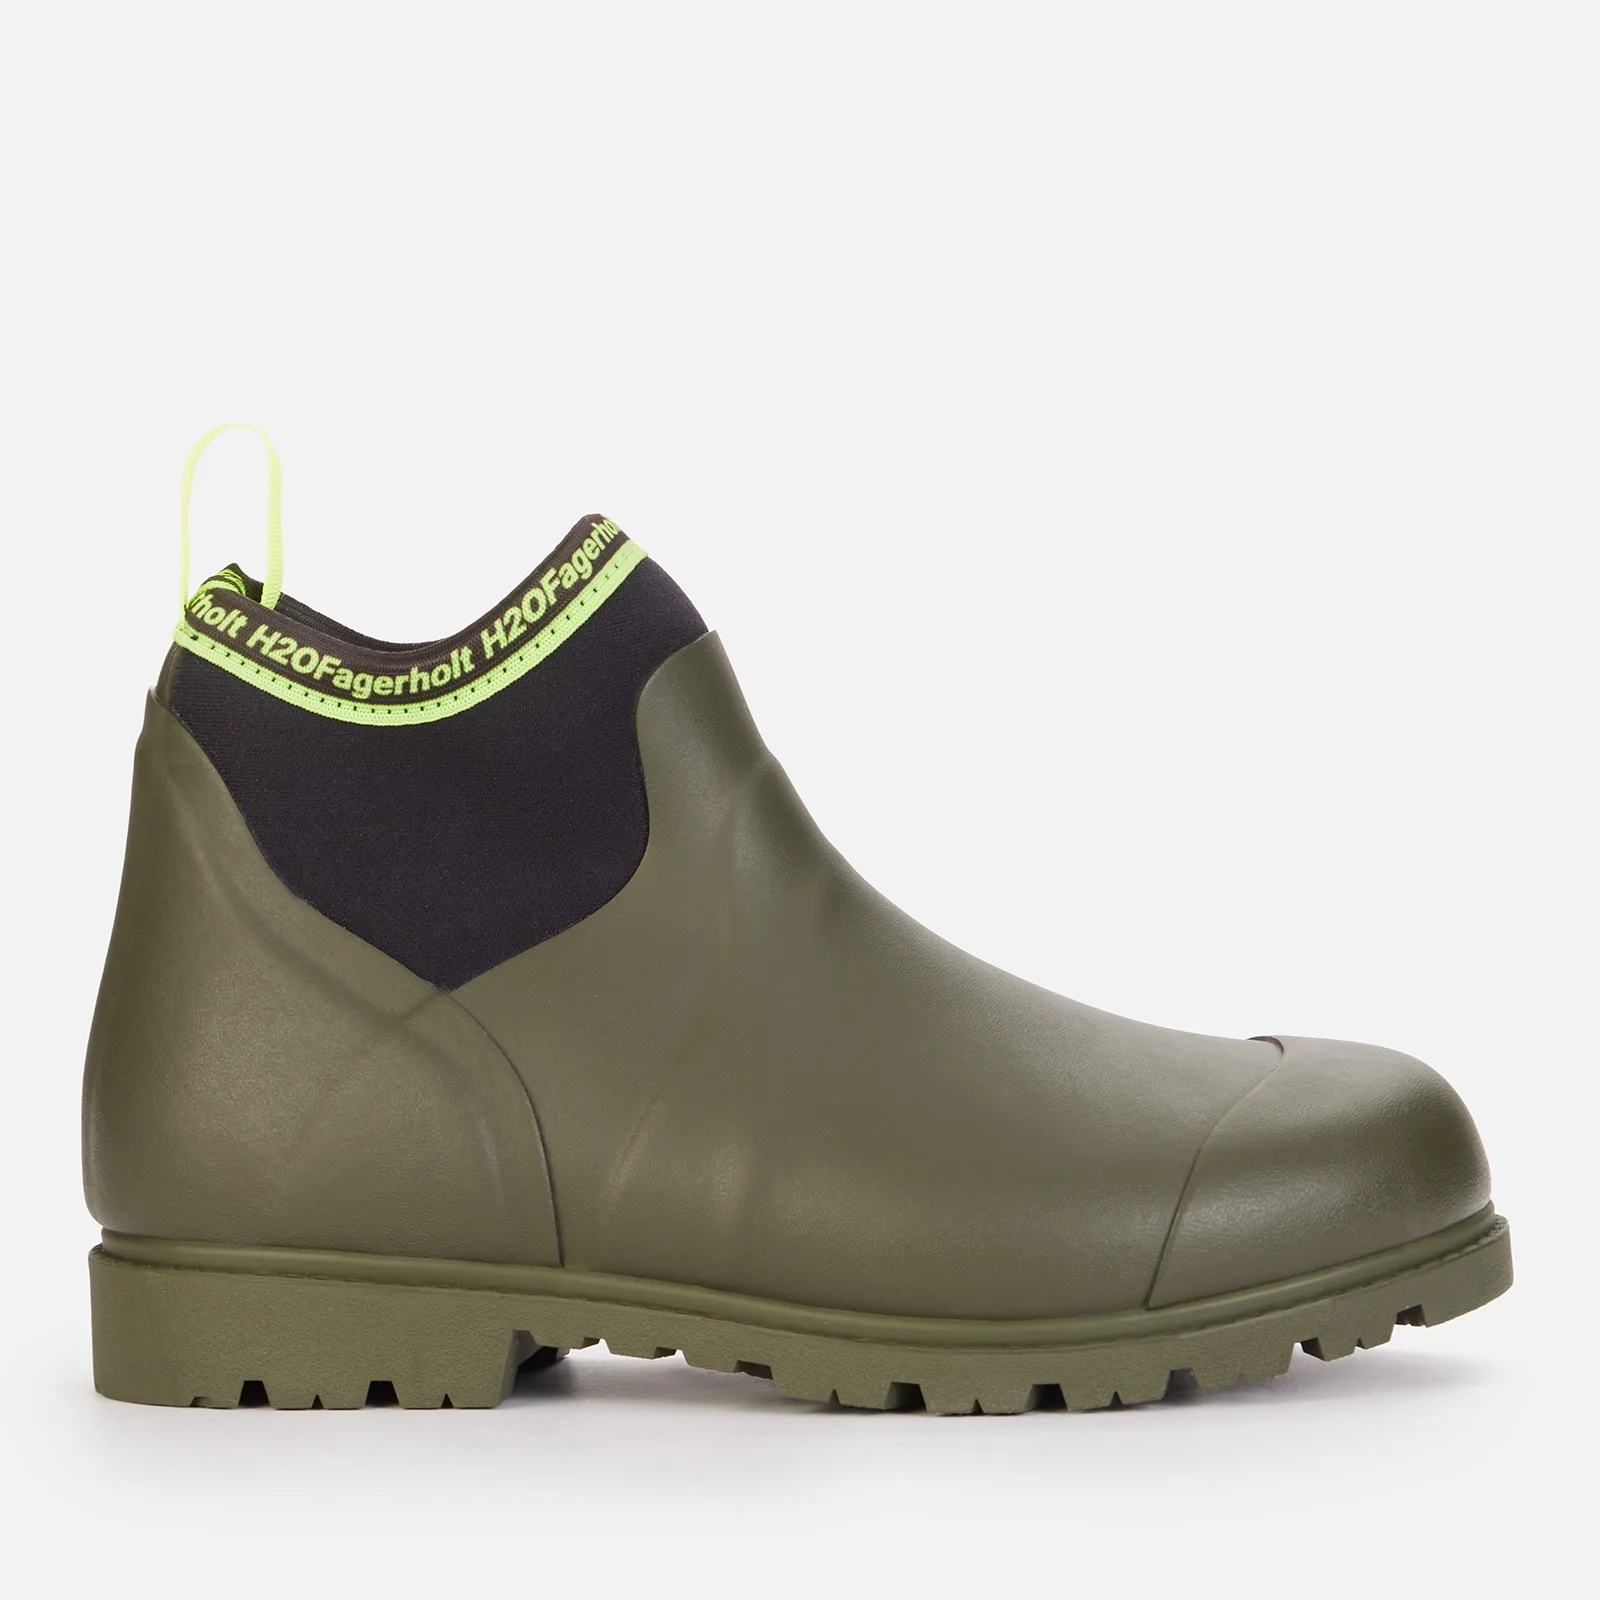 H2OFagerholt Women's Raining Or Not Boots - Army Image 1